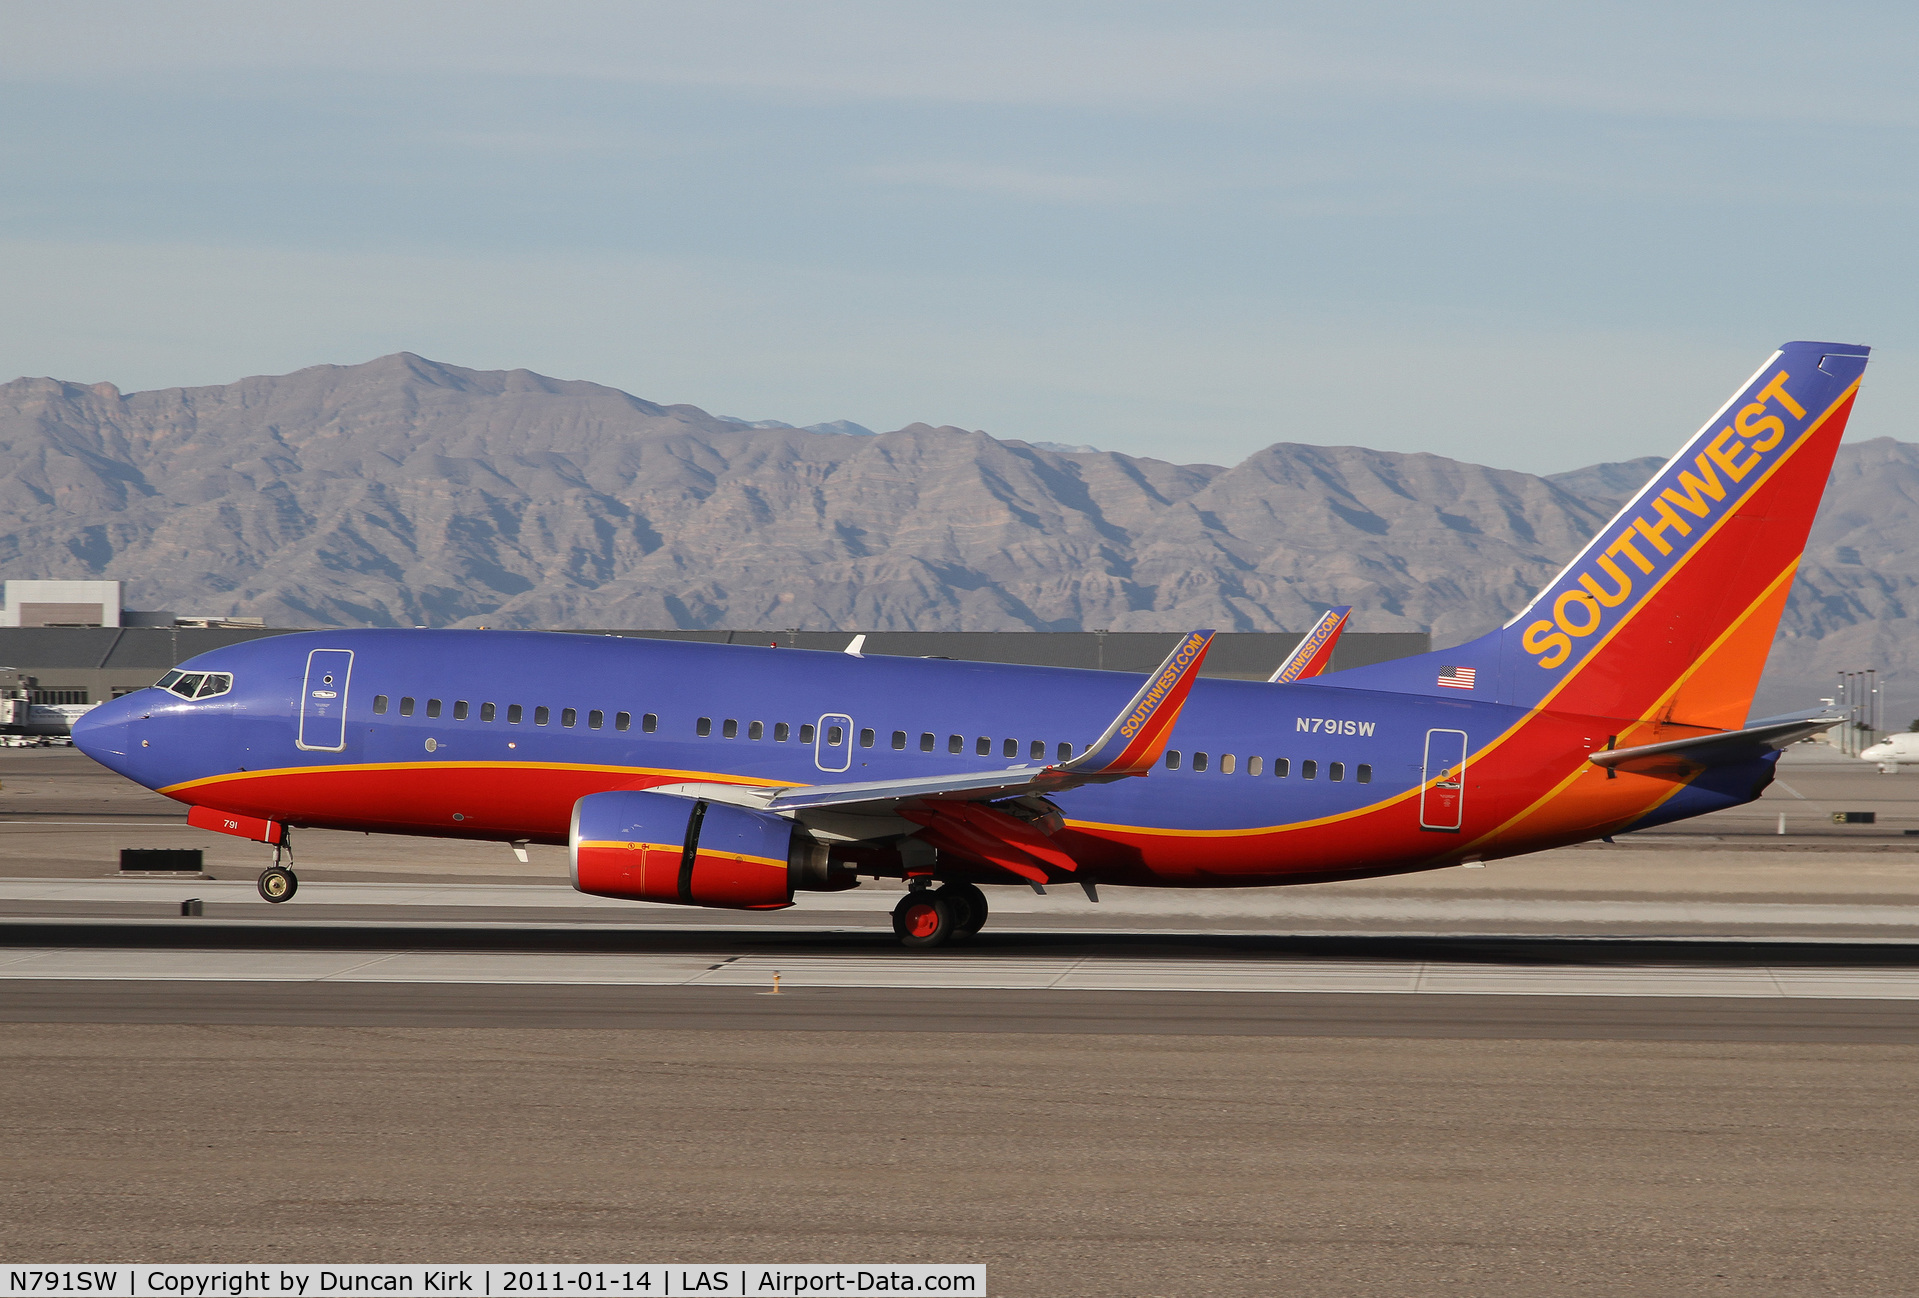 N791SW, 2000 Boeing 737-7H4 C/N 27886, Photographing SW 737's can't be helped at LAS!